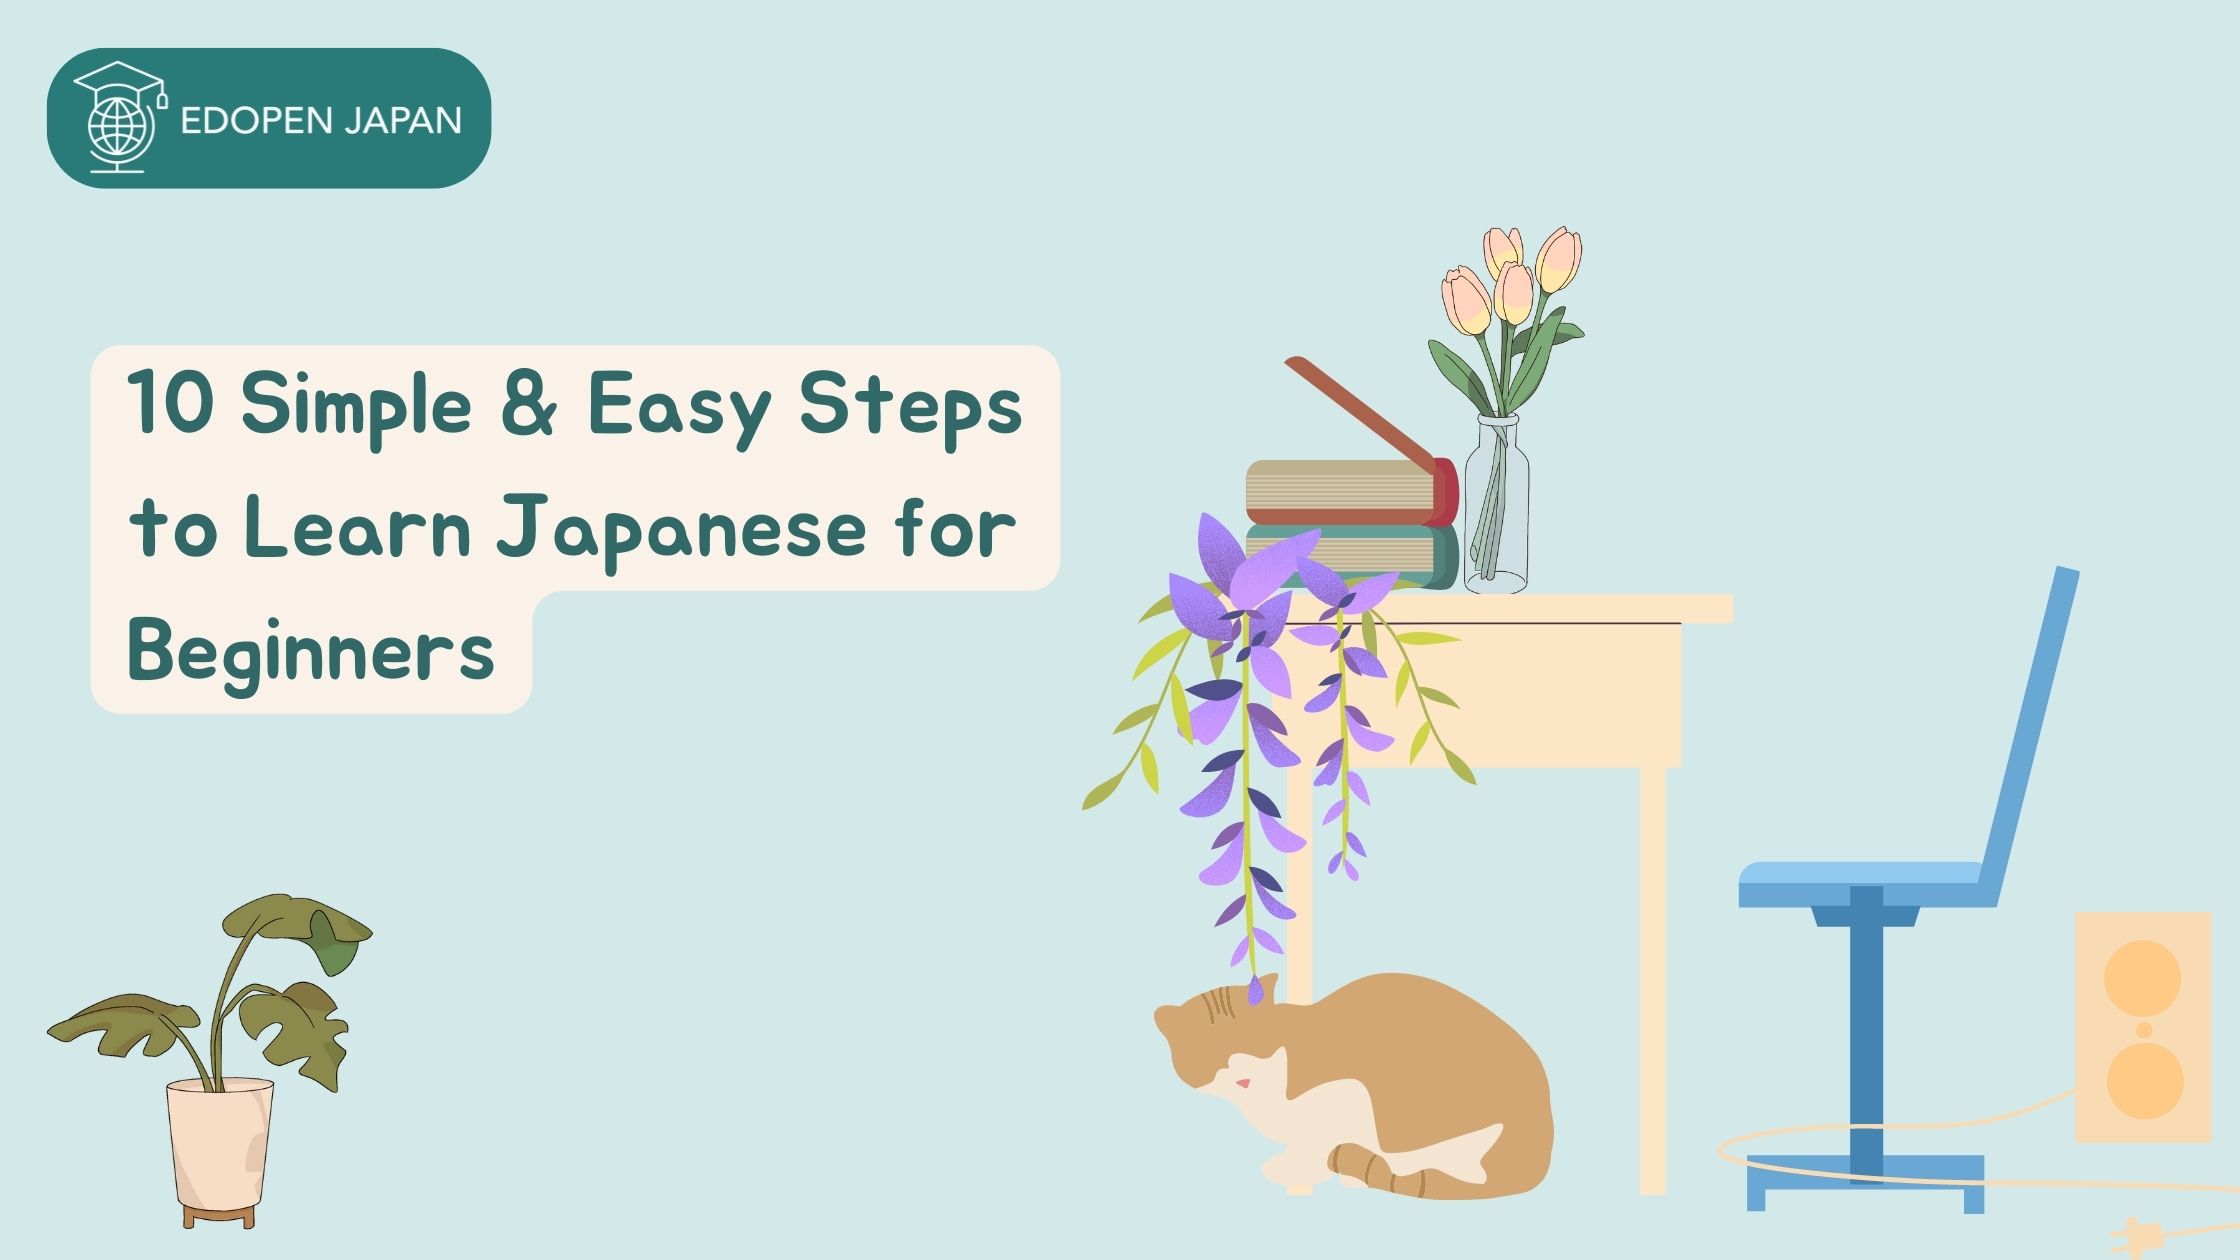 10 Simple & Easy Steps to Learn Japanese for Beginners